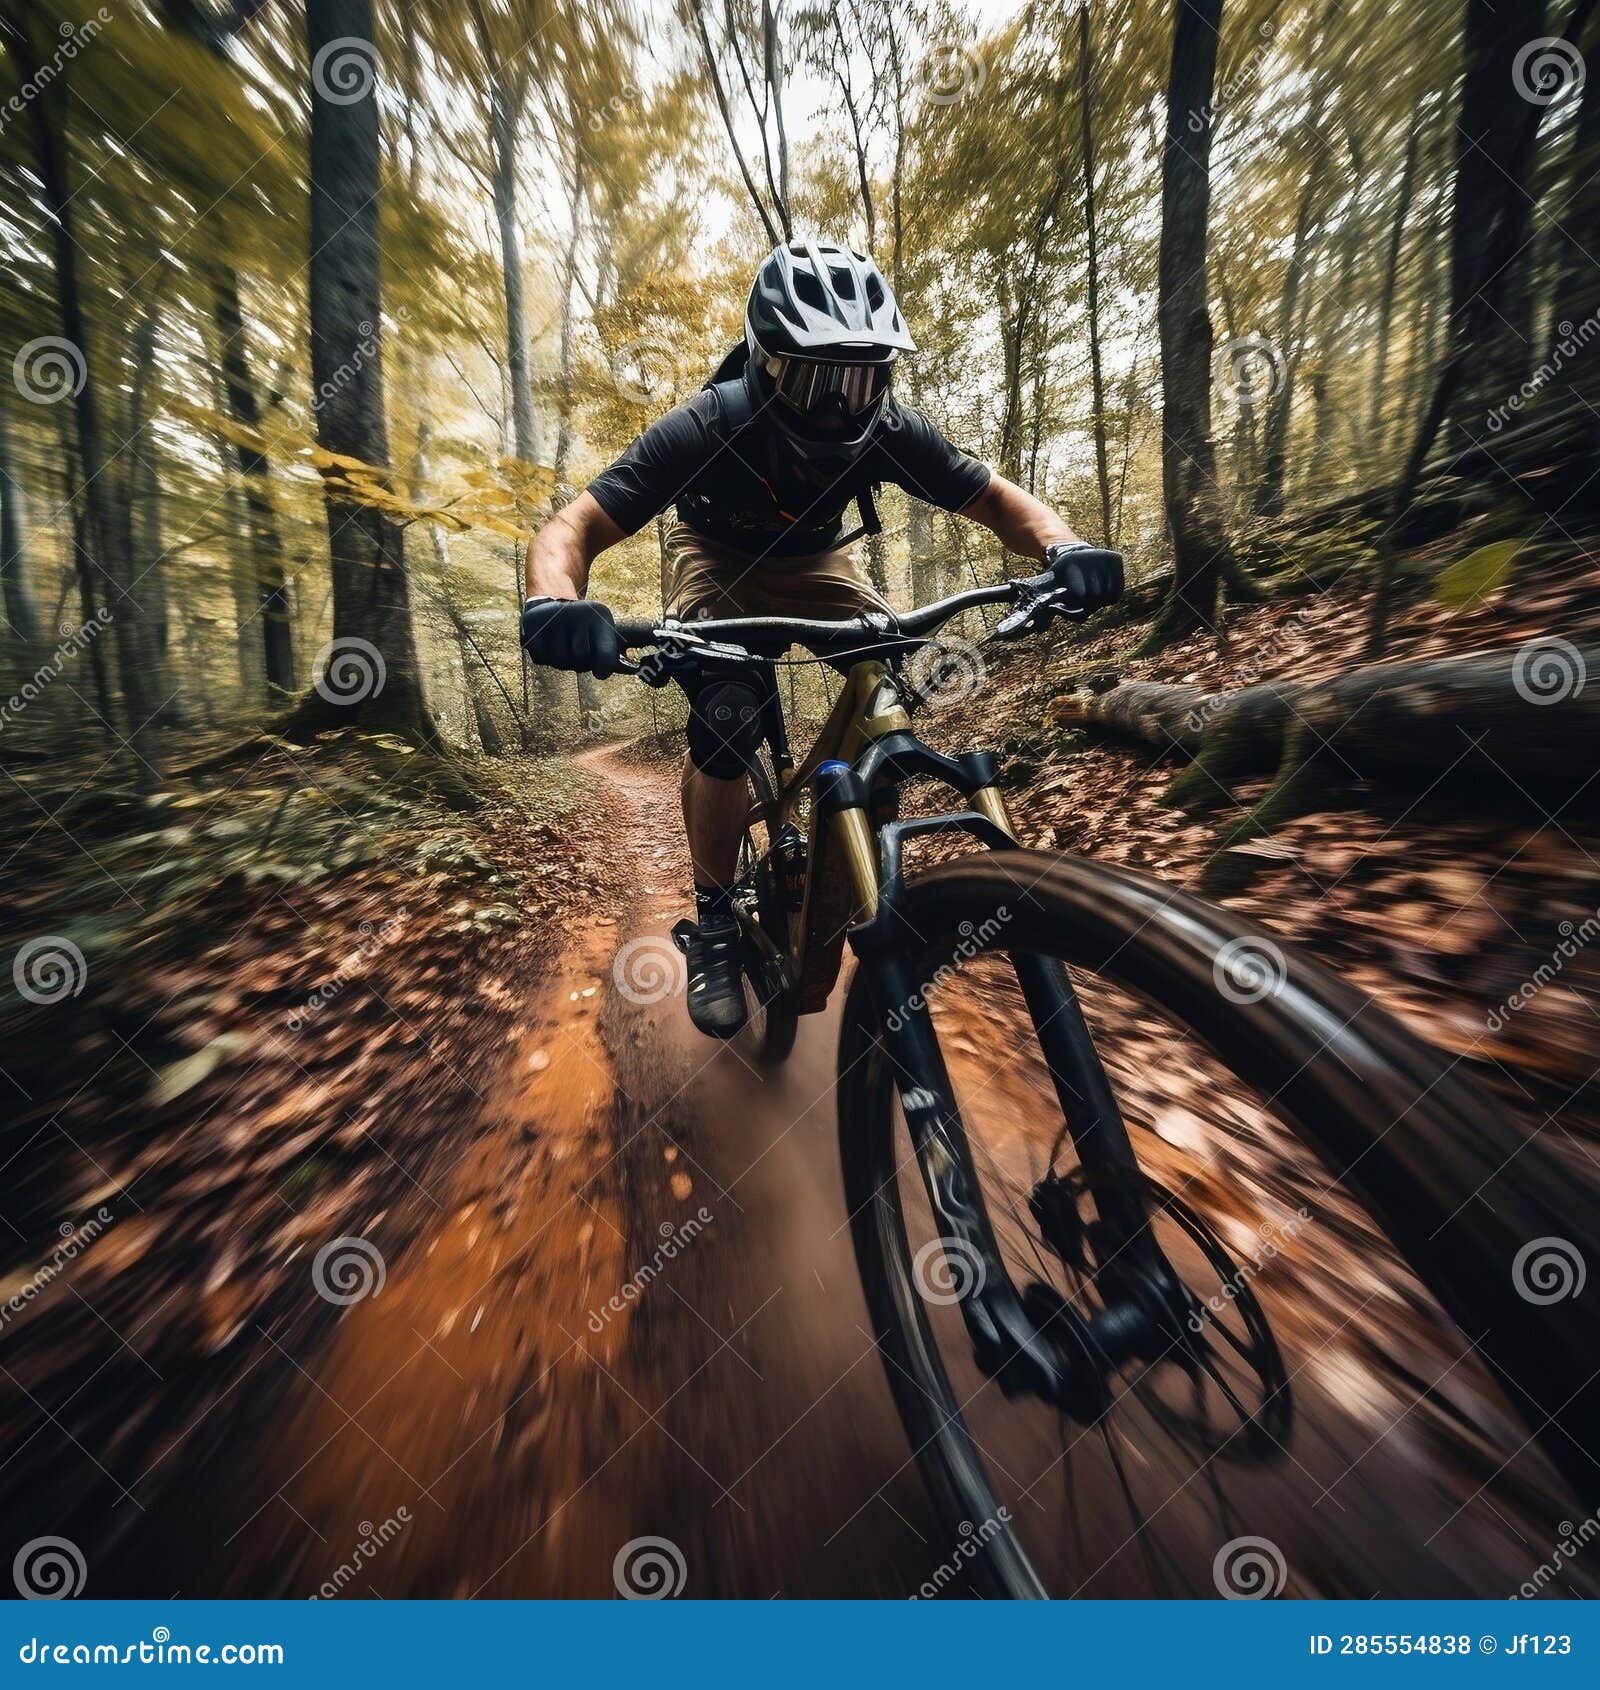 forest rush: a thrilling mountain bike adventure